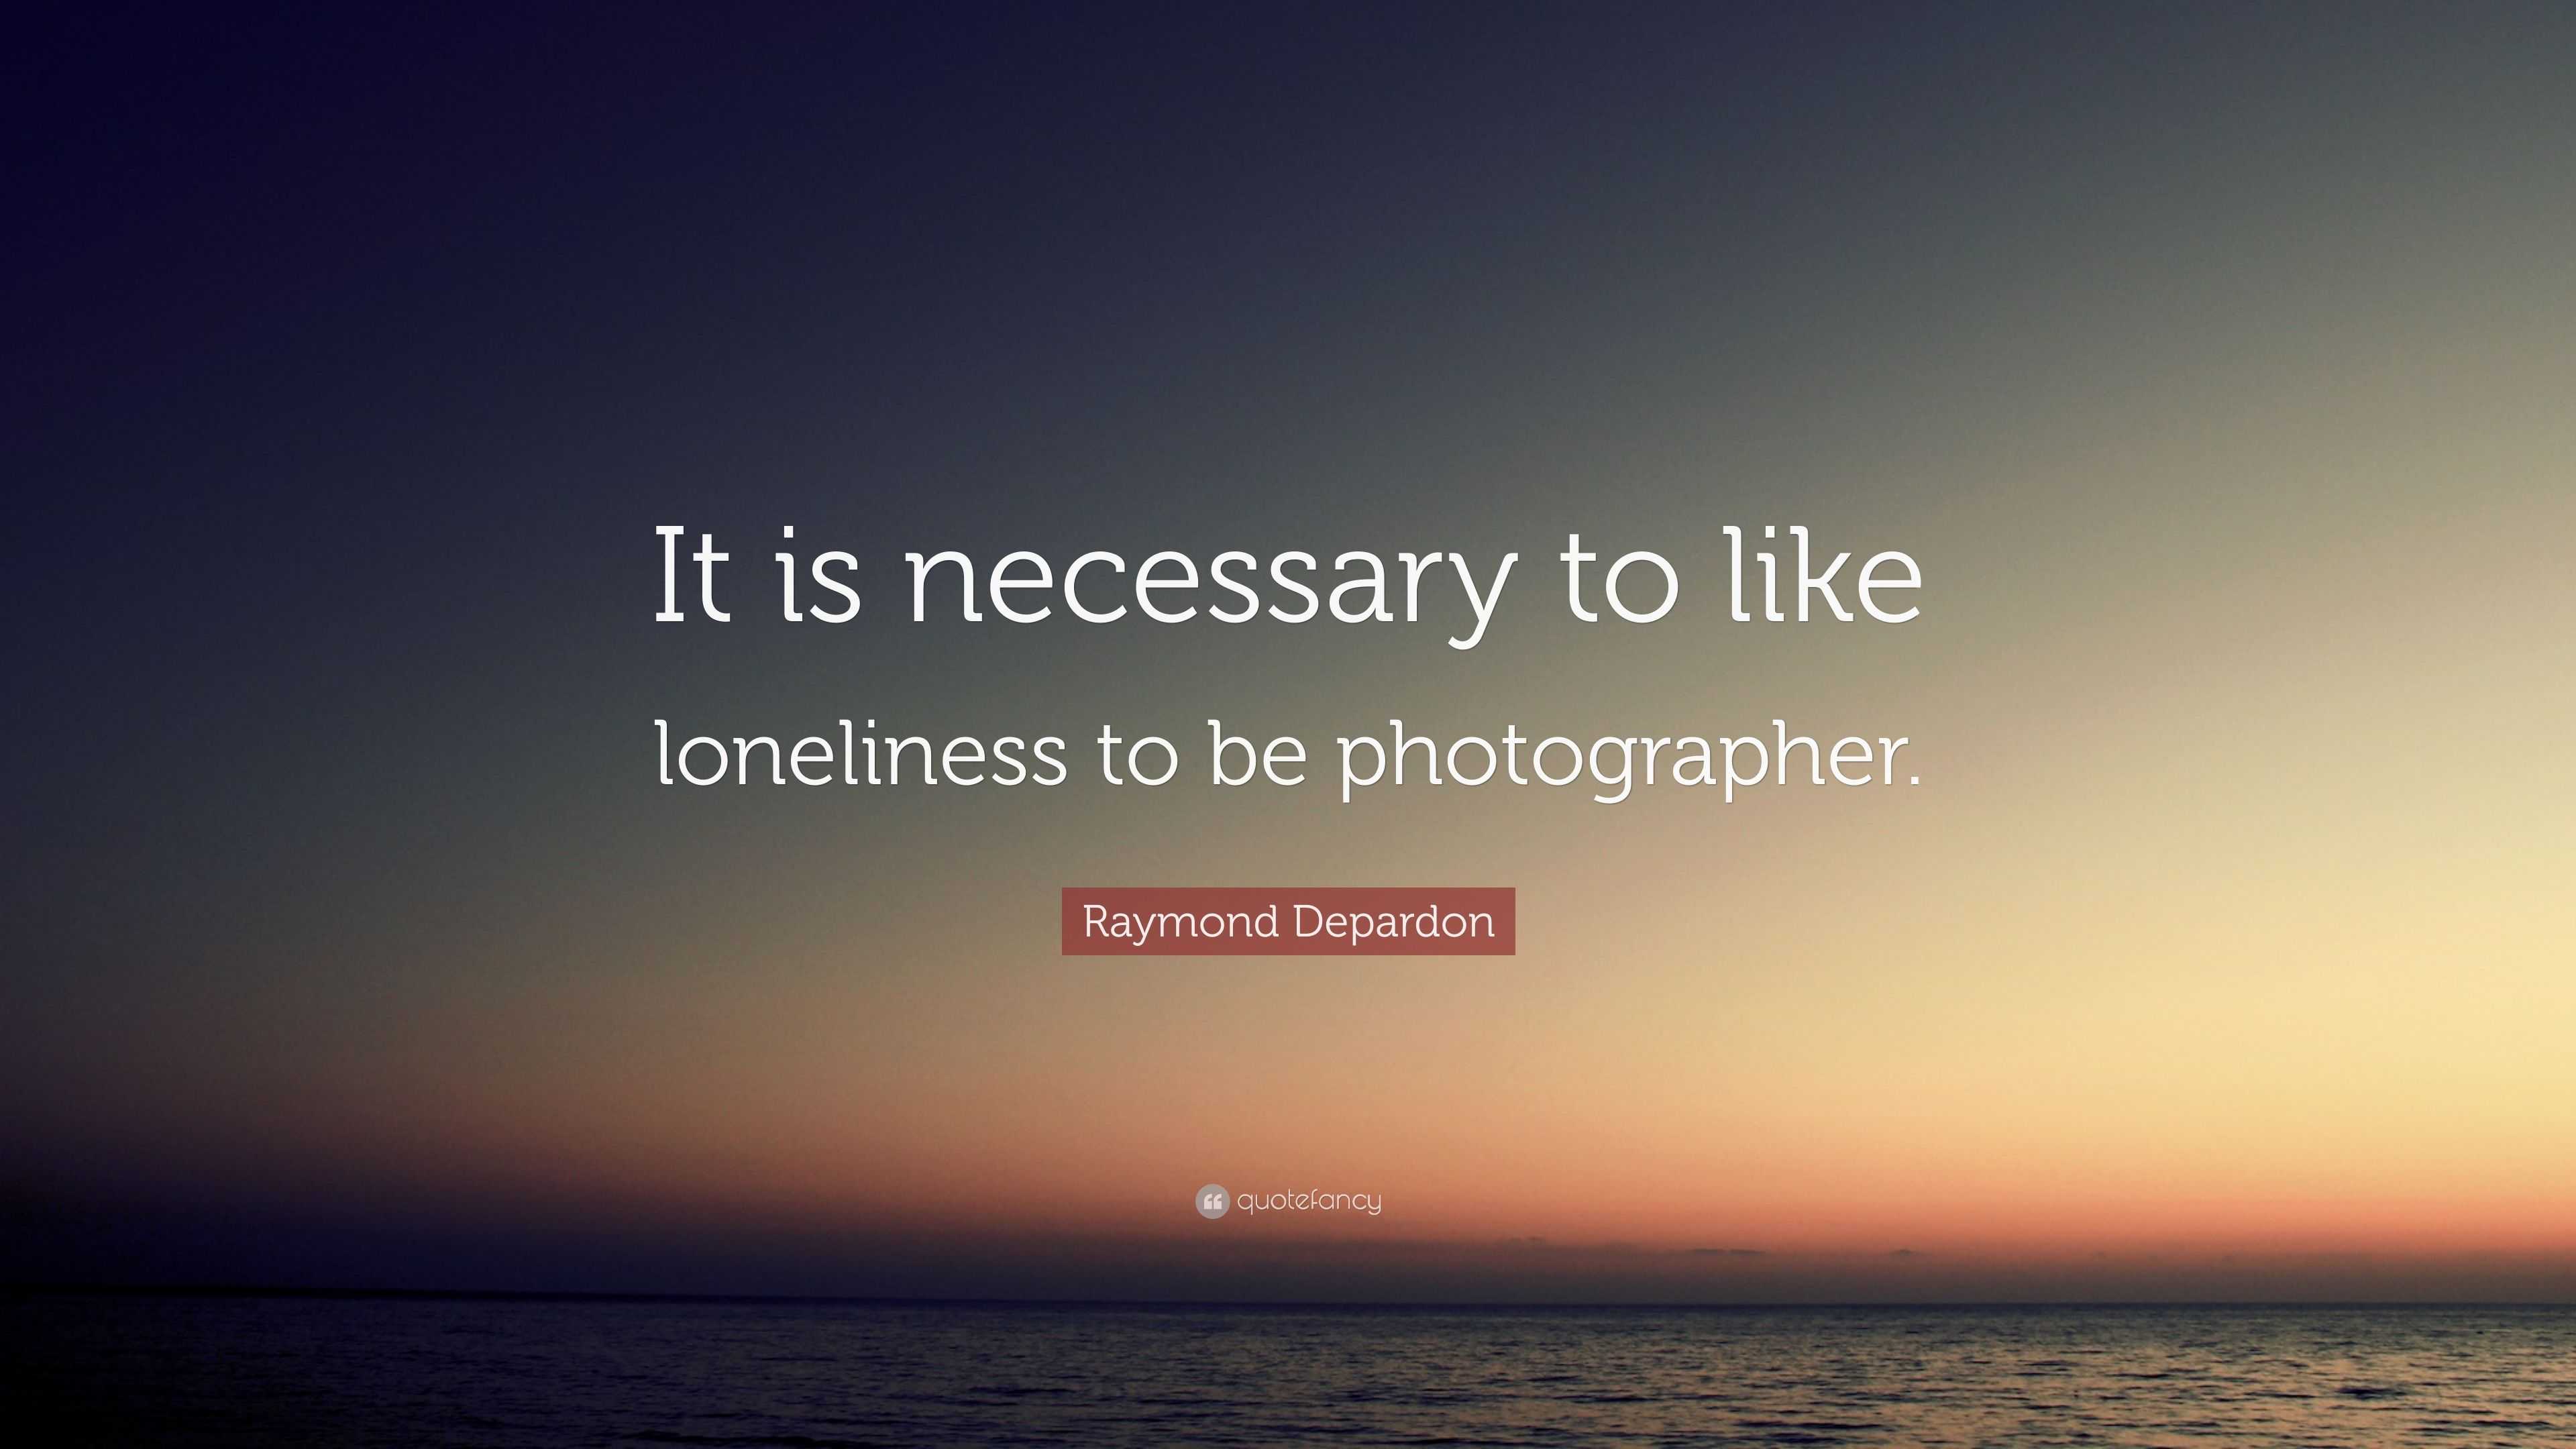 Raymond Depardon Quote: “It is necessary to like loneliness to be ...